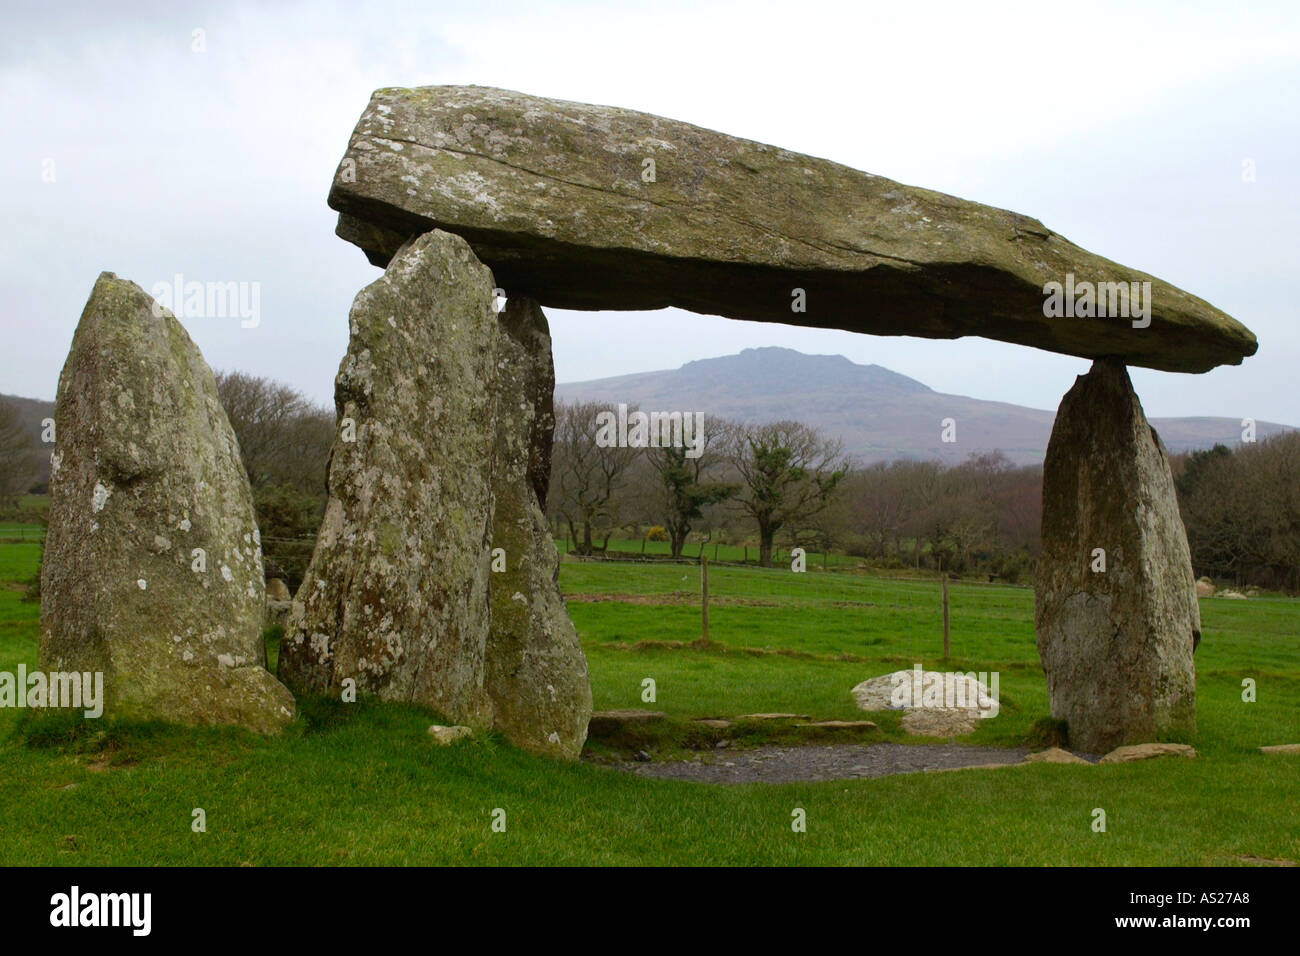 Pentre Ifan burial chamber near Newport Pembrokeshire Wales UK with Carningli in the distance Stock Photo